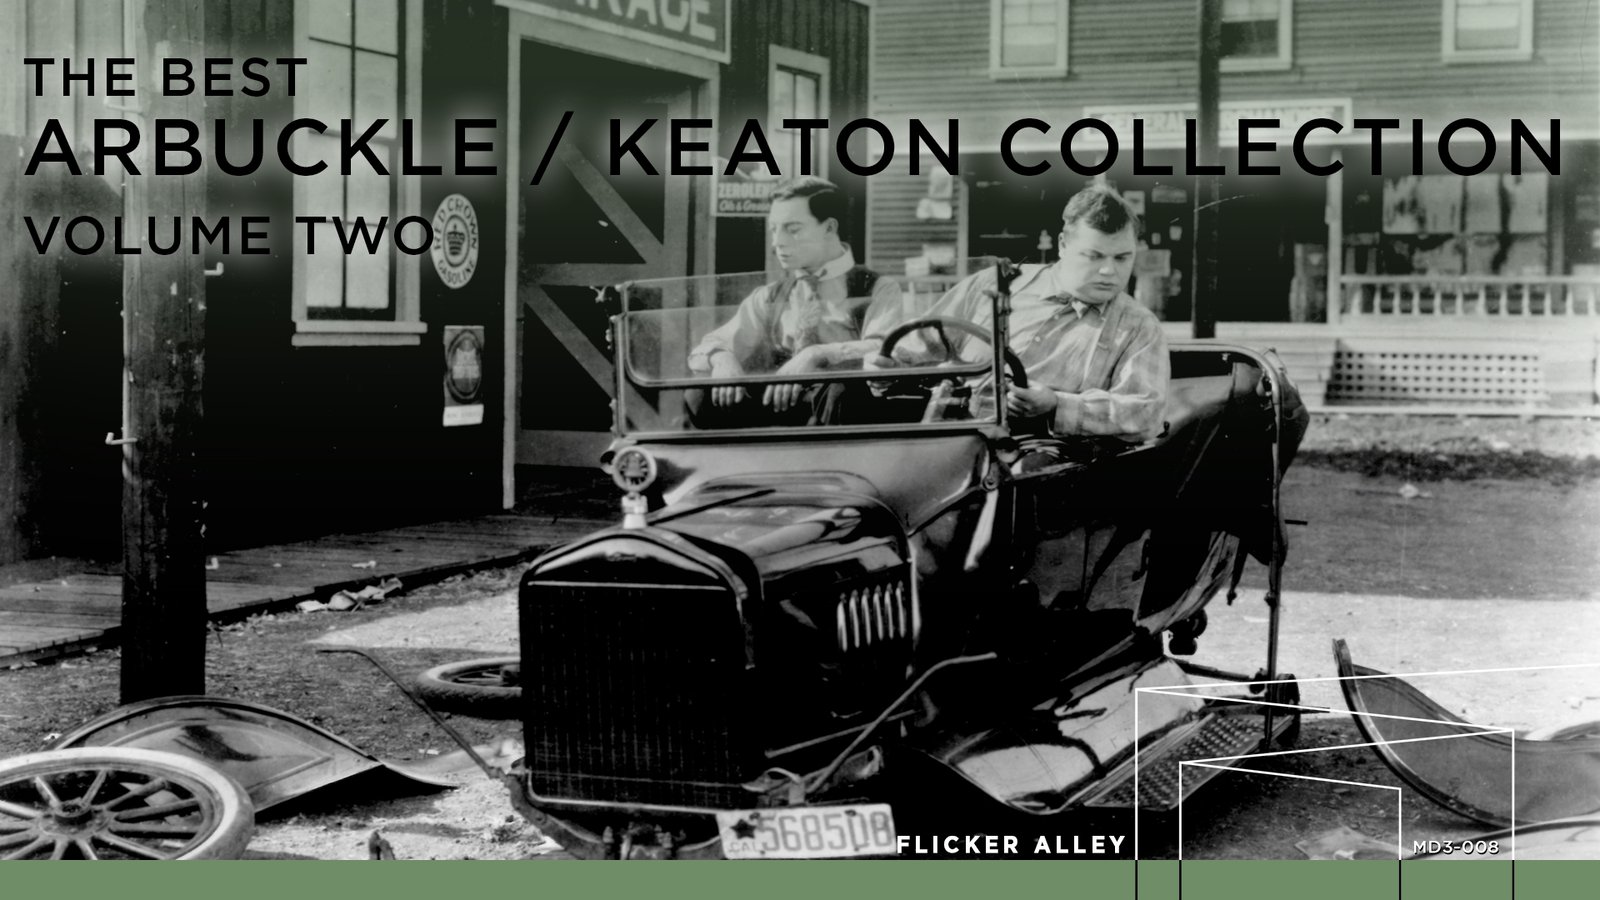 The Best Arbuckle/Keaton Collection Volume Two